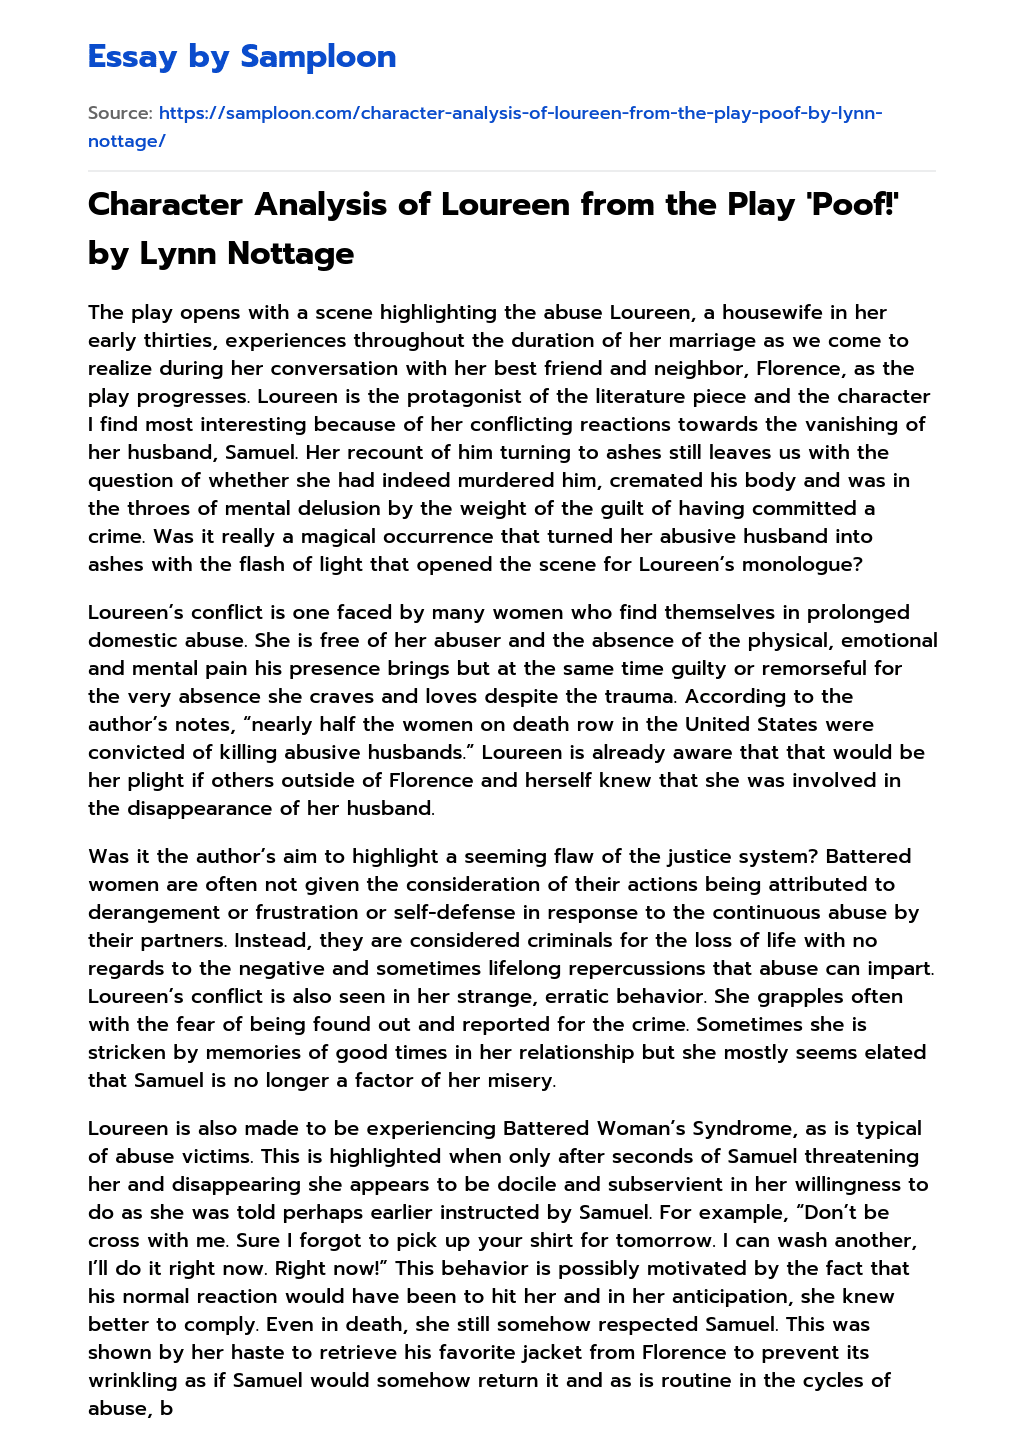 Character Analysis of Loureen from the Play ‘Poof!’ by Lynn Nottage essay